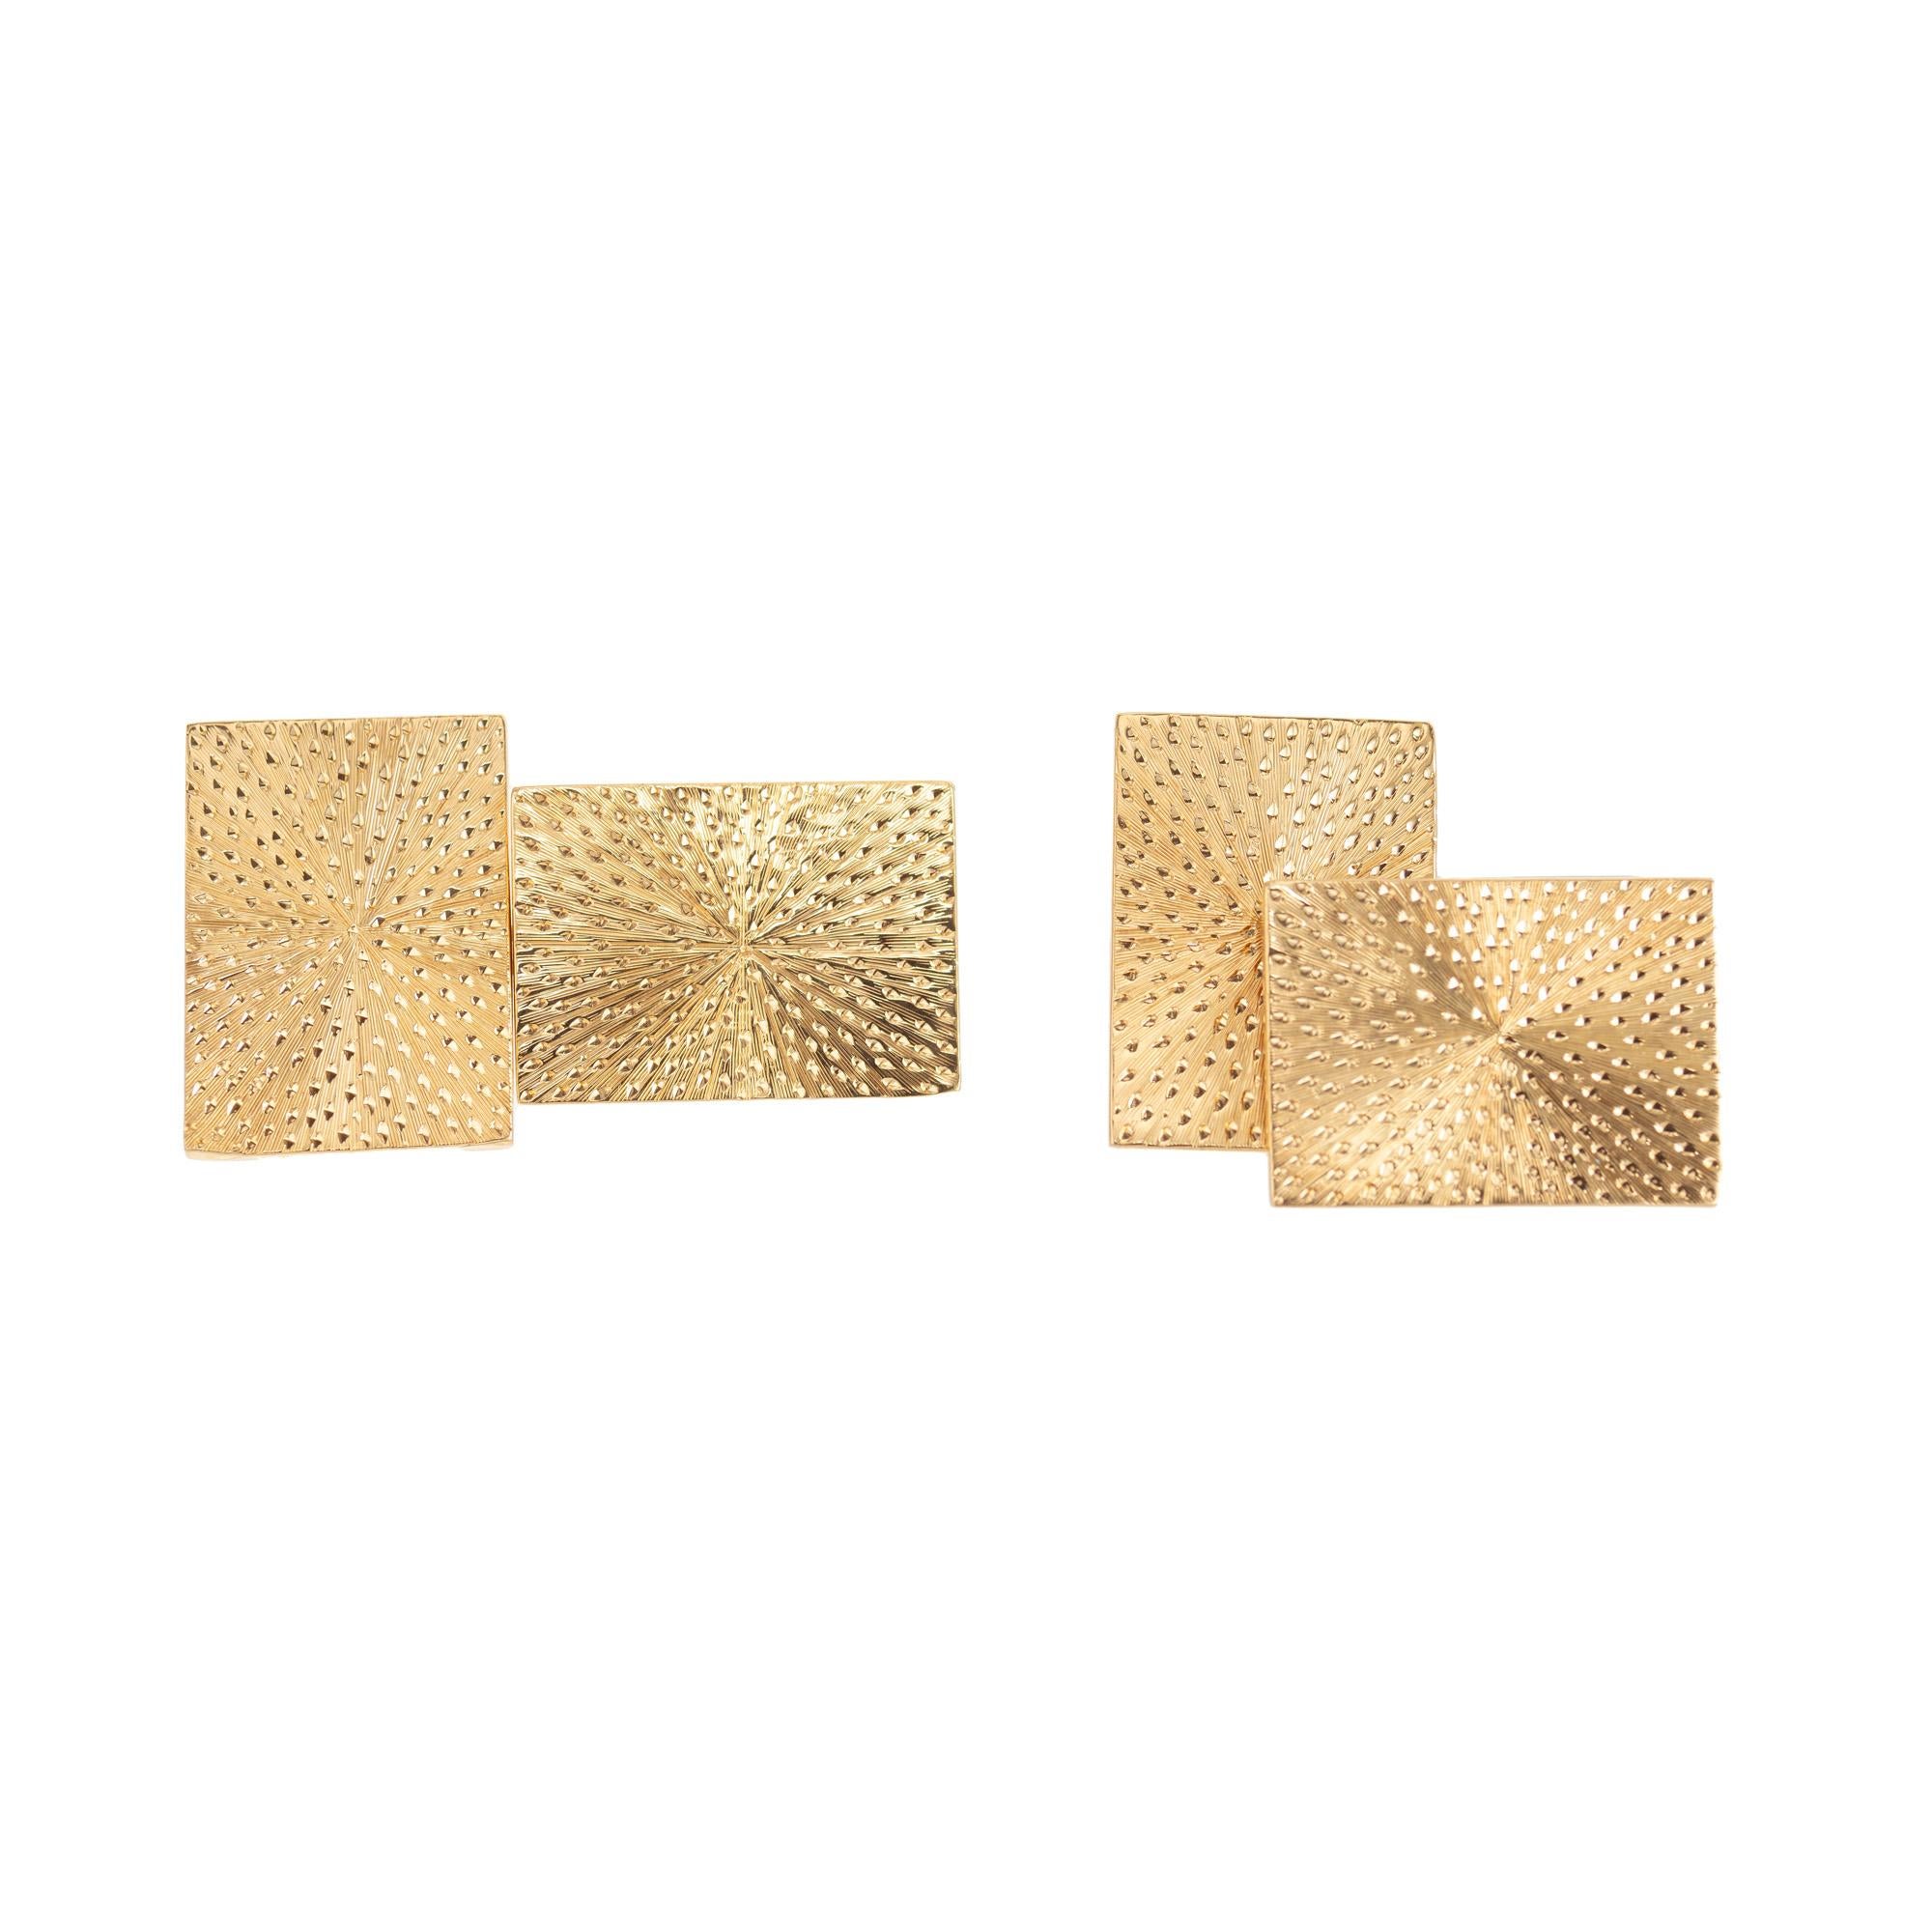 Tiffany & Co Yellow Gold Rectangular Cufflinks In Good Condition For Sale In Stamford, CT